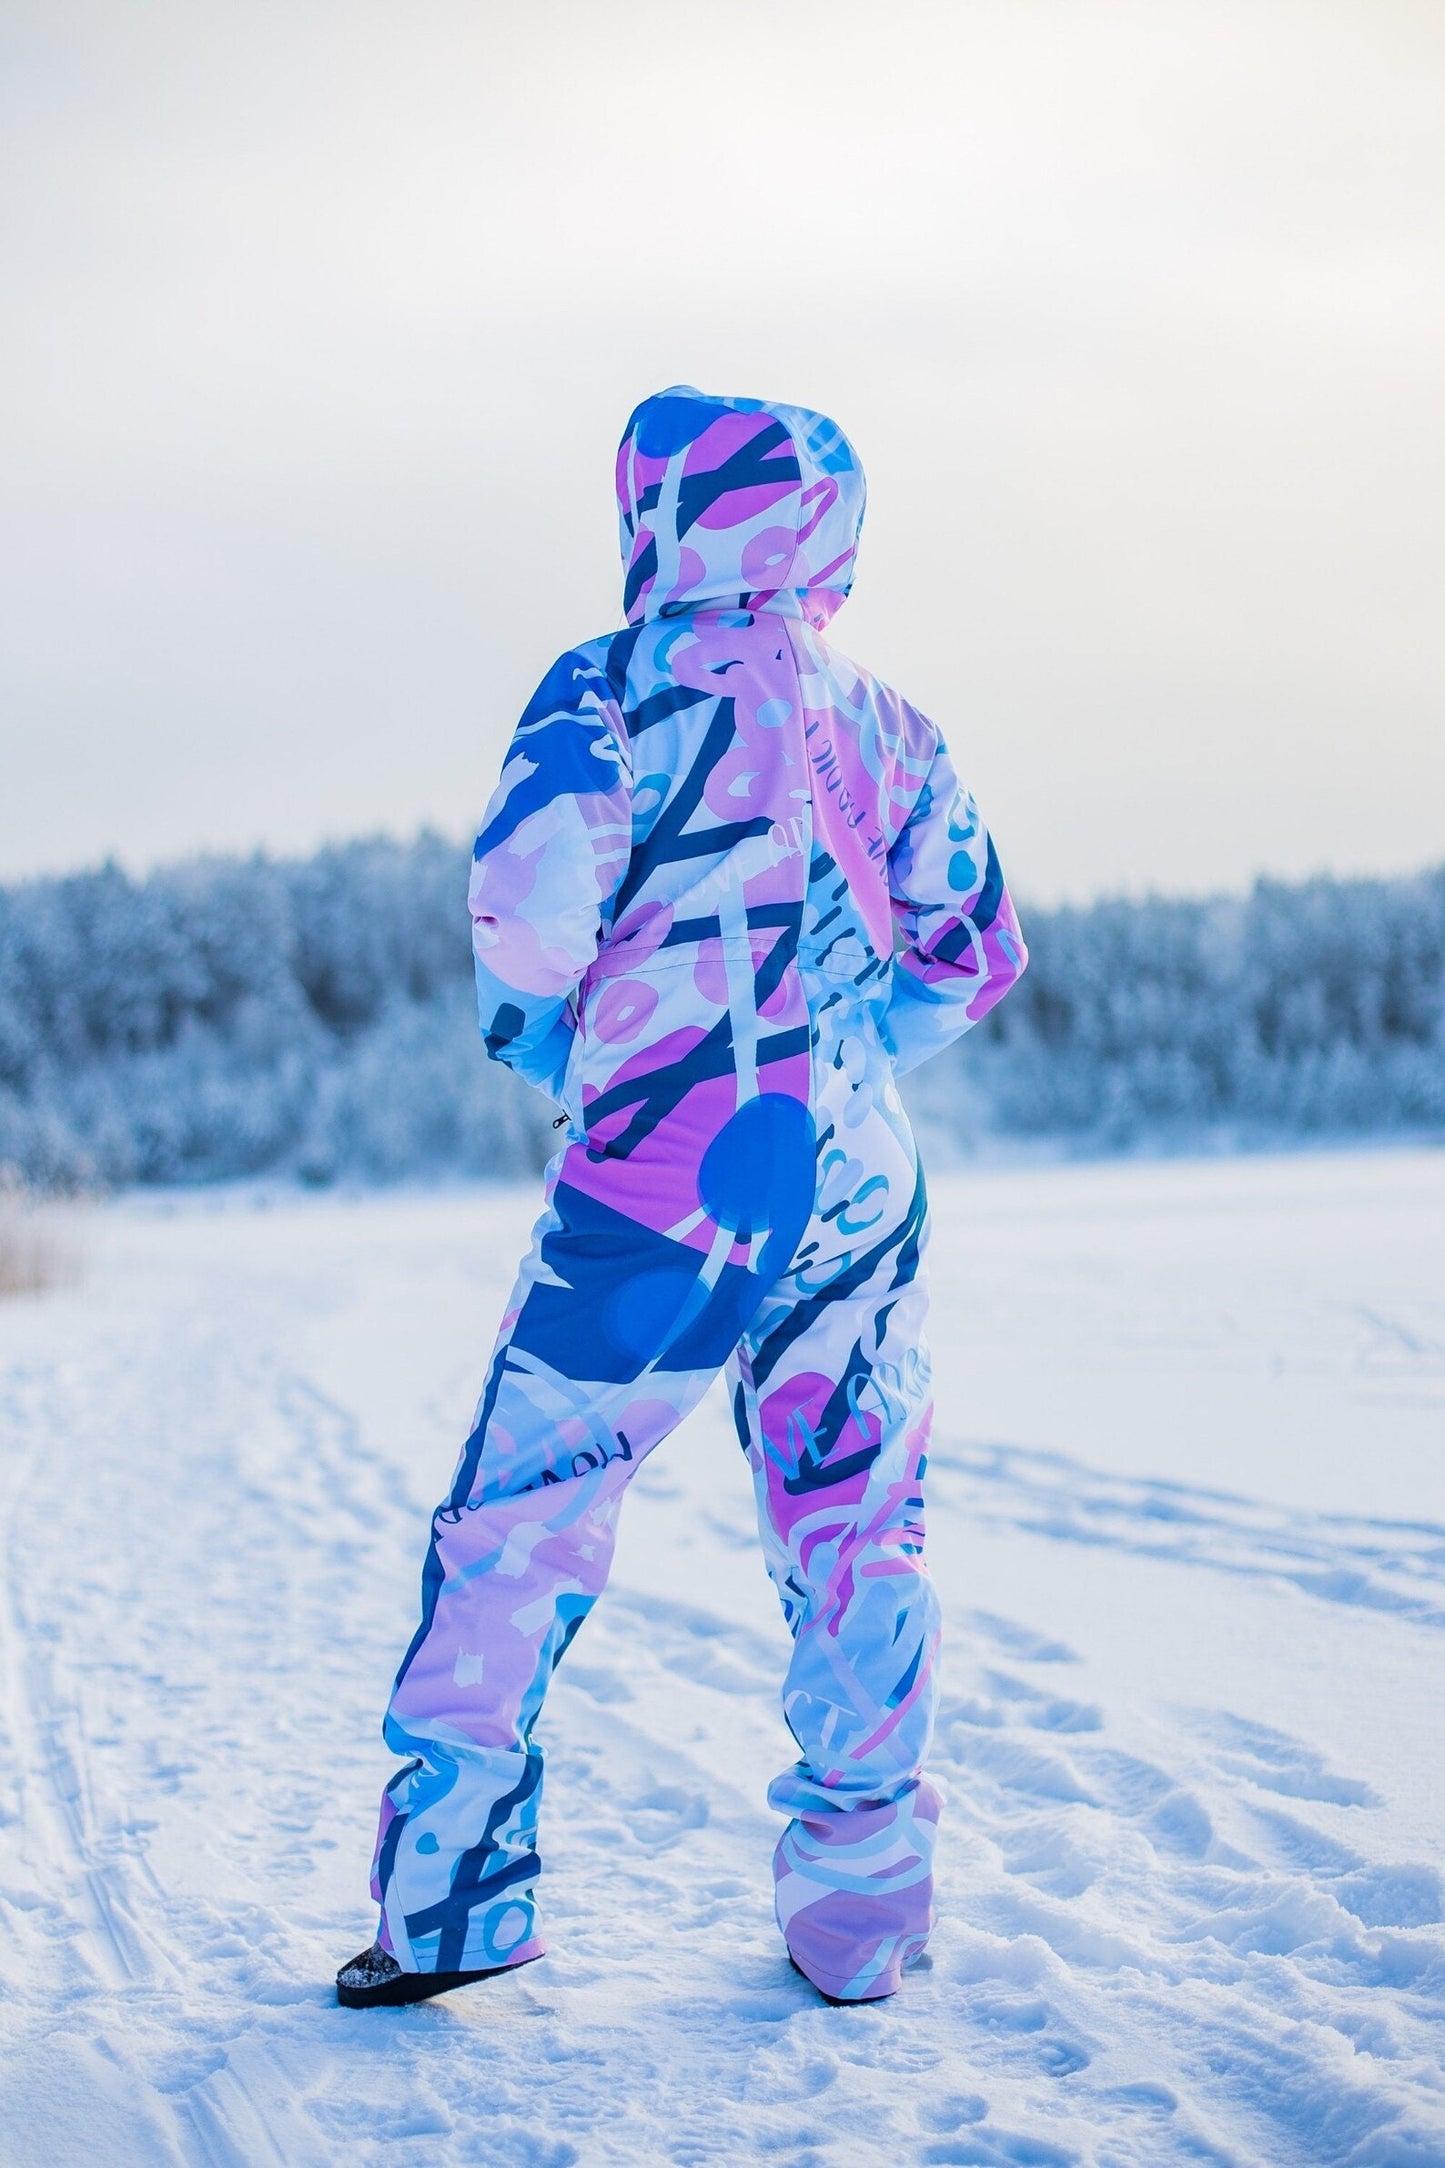 SET: Light Pink Winter Ski Jumpsuit, Snowboard Clothes, Snowboard suit, Skiing Overall, Women Mountain's clothes, Winter Thermal underwear